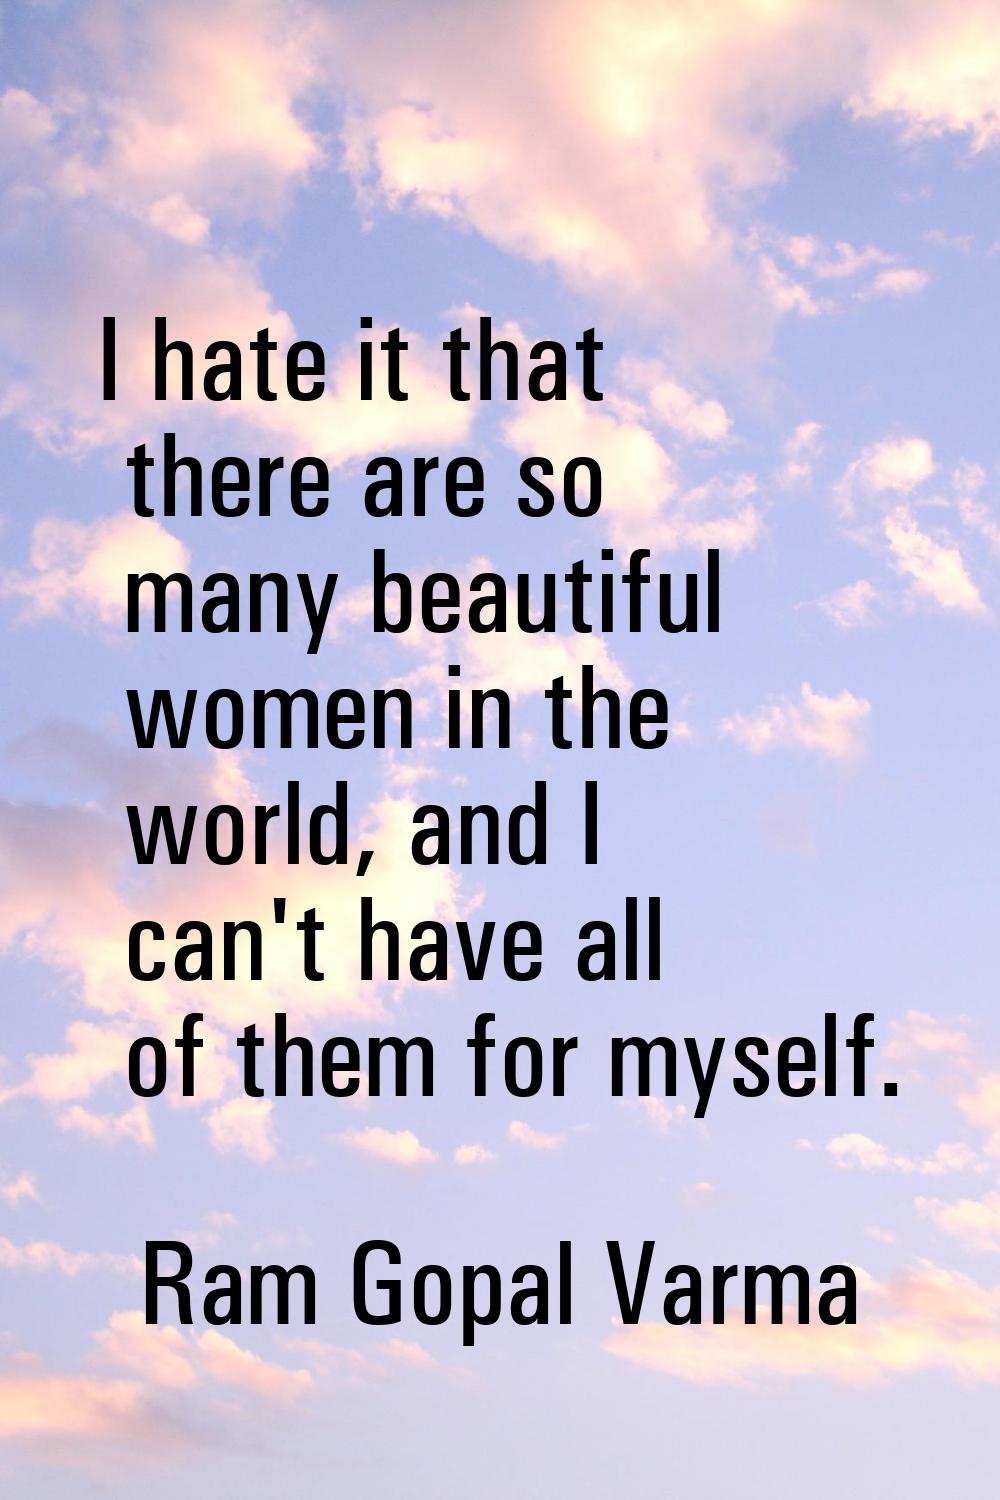 I hate it that there are so many beautiful women in the world, and I can't have all of them for mys